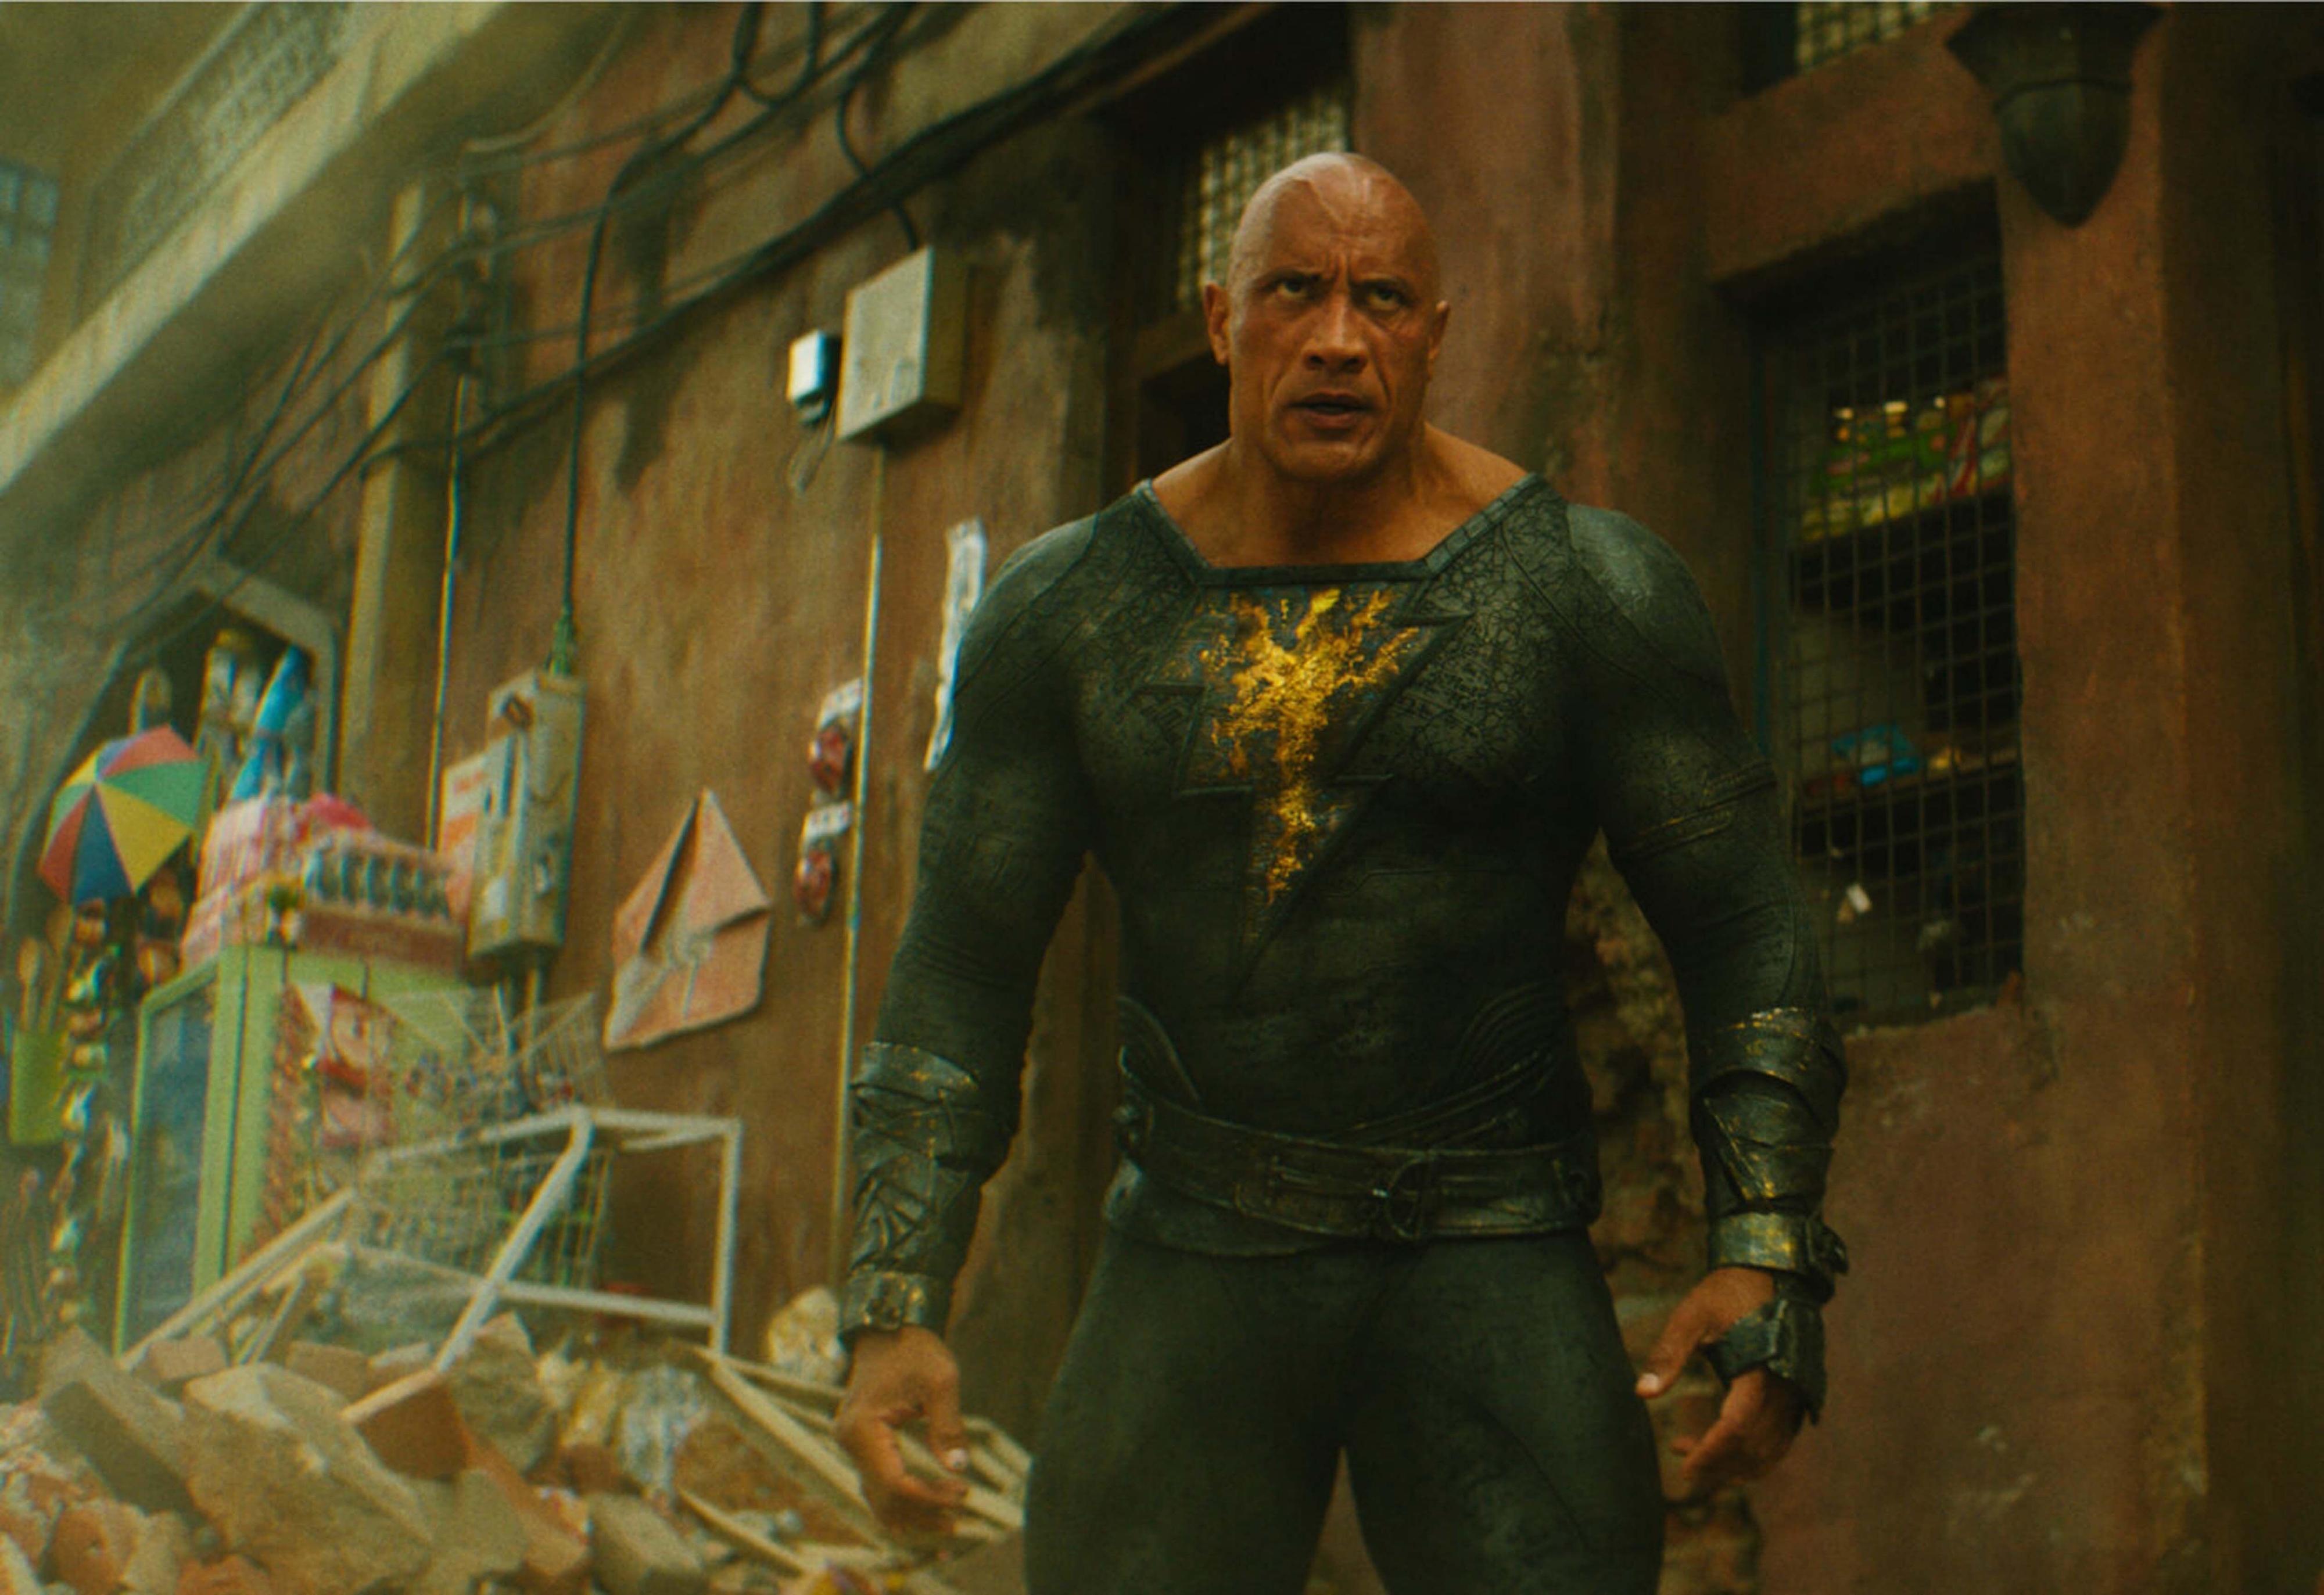 Dwayne Johnson stands in the street of a desert city wearing a blackened Shazam costume